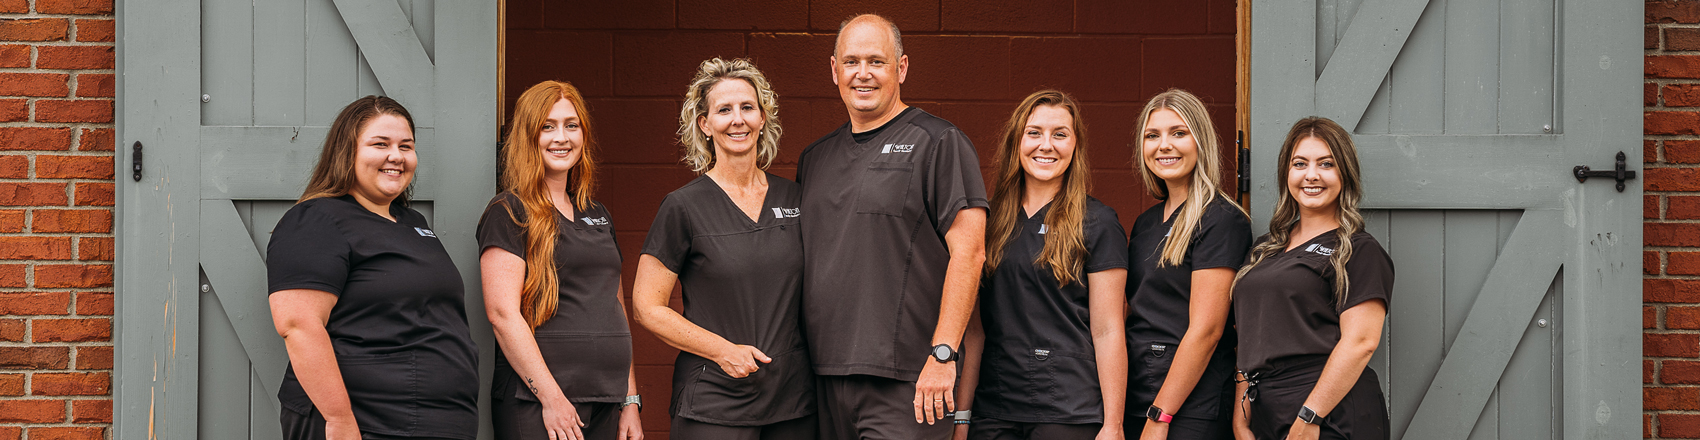 Learn More About Walton Family Dentistry Near Me In Bardstown, KY